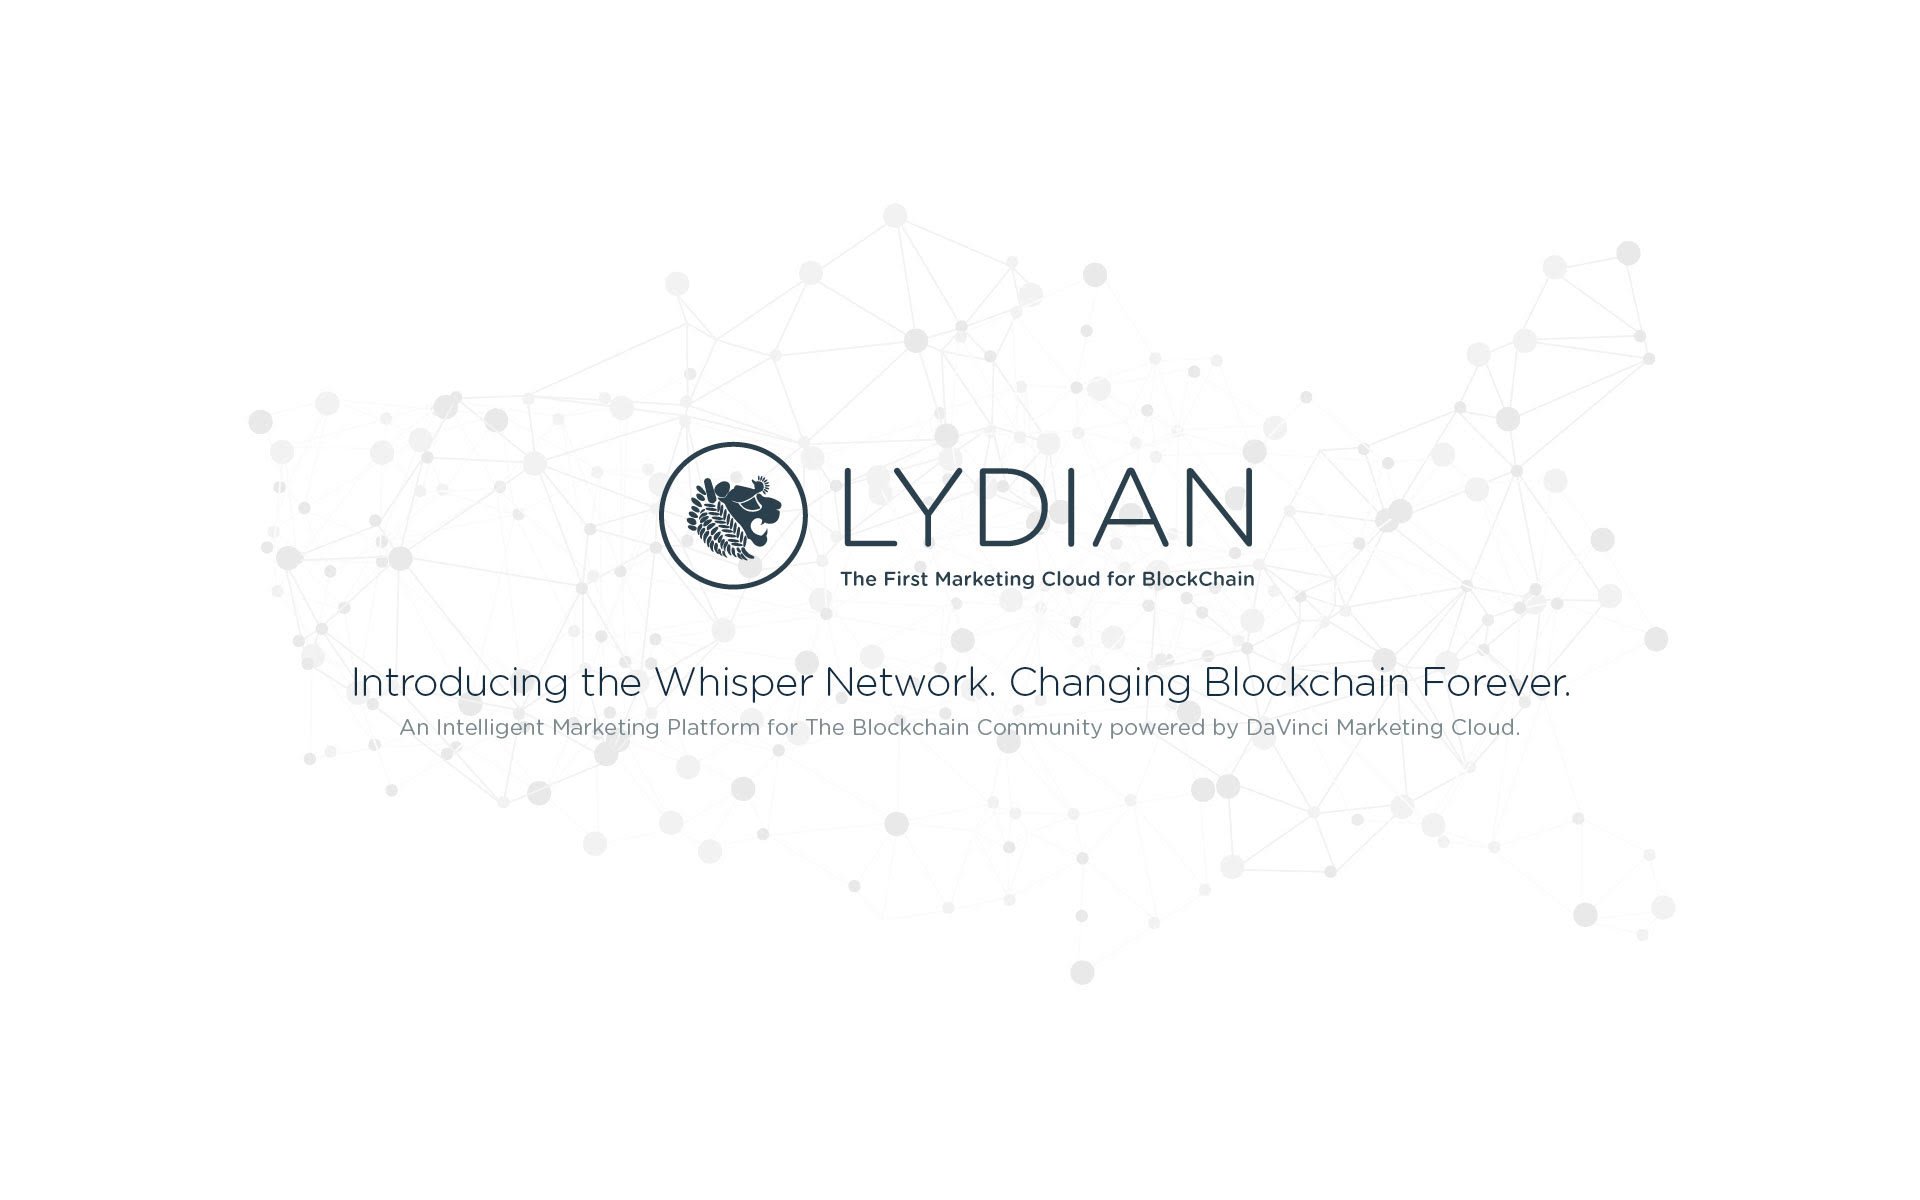 Lydian Gets New Investment from Prolific Blockchain Investor, Chris Rouland